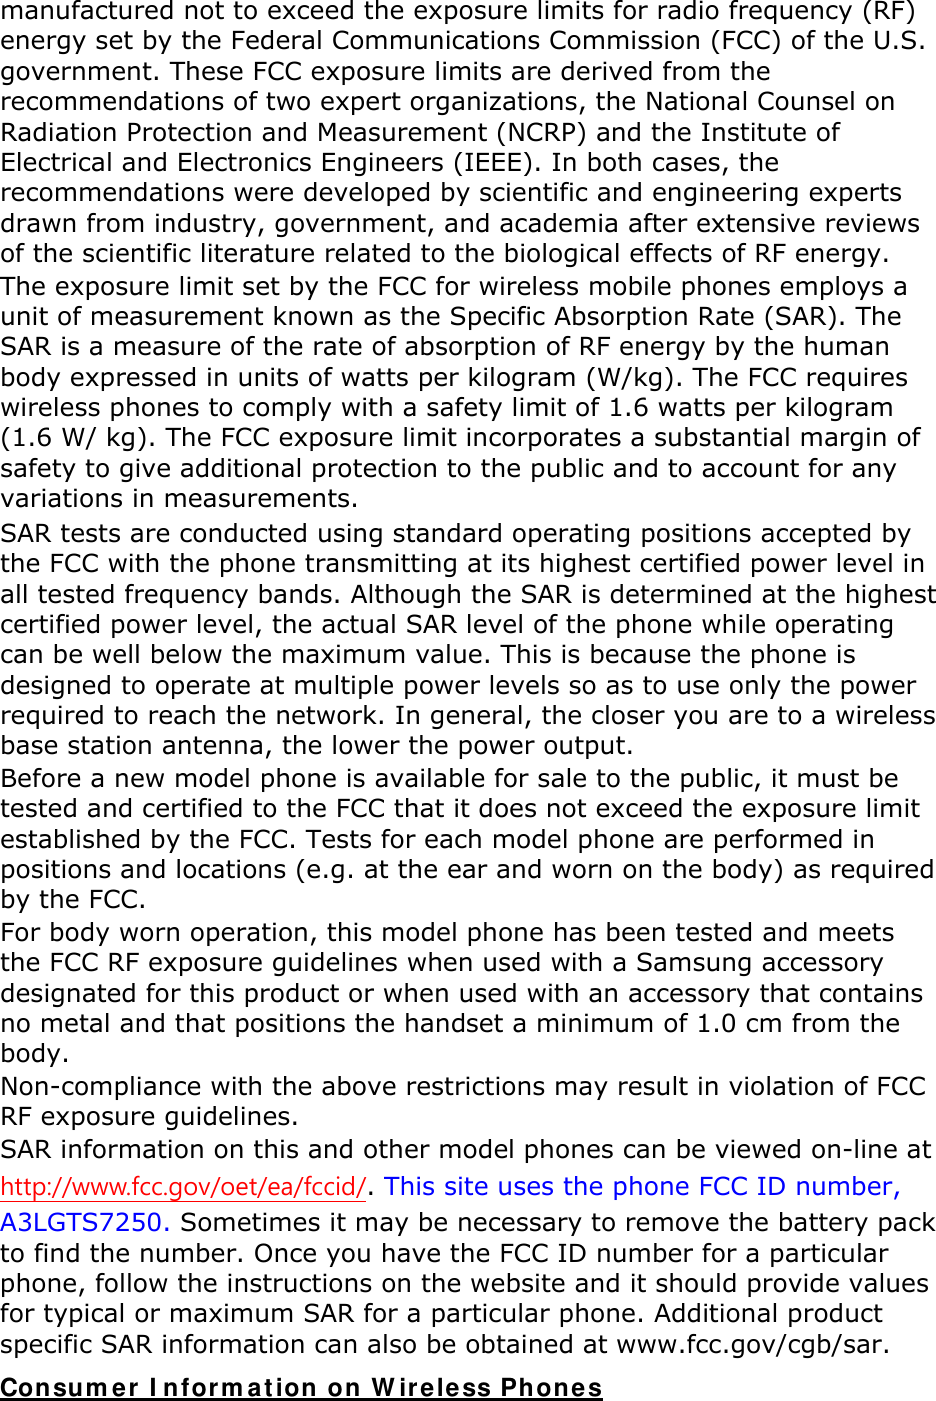 manufactured not to exceed the exposure limits for radio frequency (RF) energy set by the Federal Communications Commission (FCC) of the U.S. government. These FCC exposure limits are derived from the recommendations of two expert organizations, the National Counsel on Radiation Protection and Measurement (NCRP) and the Institute of Electrical and Electronics Engineers (IEEE). In both cases, the recommendations were developed by scientific and engineering experts drawn from industry, government, and academia after extensive reviews of the scientific literature related to the biological effects of RF energy. The exposure limit set by the FCC for wireless mobile phones employs a unit of measurement known as the Specific Absorption Rate (SAR). The SAR is a measure of the rate of absorption of RF energy by the human body expressed in units of watts per kilogram (W/kg). The FCC requires wireless phones to comply with a safety limit of 1.6 watts per kilogram (1.6 W/ kg). The FCC exposure limit incorporates a substantial margin of safety to give additional protection to the public and to account for any variations in measurements. SAR tests are conducted using standard operating positions accepted by the FCC with the phone transmitting at its highest certified power level in all tested frequency bands. Although the SAR is determined at the highest certified power level, the actual SAR level of the phone while operating can be well below the maximum value. This is because the phone is designed to operate at multiple power levels so as to use only the power required to reach the network. In general, the closer you are to a wireless base station antenna, the lower the power output. Before a new model phone is available for sale to the public, it must be tested and certified to the FCC that it does not exceed the exposure limit established by the FCC. Tests for each model phone are performed in positions and locations (e.g. at the ear and worn on the body) as required by the FCC.     For body worn operation, this model phone has been tested and meets the FCC RF exposure guidelines when used with a Samsung accessory designated for this product or when used with an accessory that contains no metal and that positions the handset a minimum of 1.0 cm from the body.  Non-compliance with the above restrictions may result in violation of FCC RF exposure guidelines. SAR information on this and other model phones can be viewed on-line at http://www.fcc.gov/oet/ea/fccid/. This site uses the phone FCC ID number, A3LGTS7250. Sometimes it may be necessary to remove the battery pack to find the number. Once you have the FCC ID number for a particular phone, follow the instructions on the website and it should provide values for typical or maximum SAR for a particular phone. Additional product specific SAR information can also be obtained at www.fcc.gov/cgb/sar. Consumer Information on Wireless Phones 